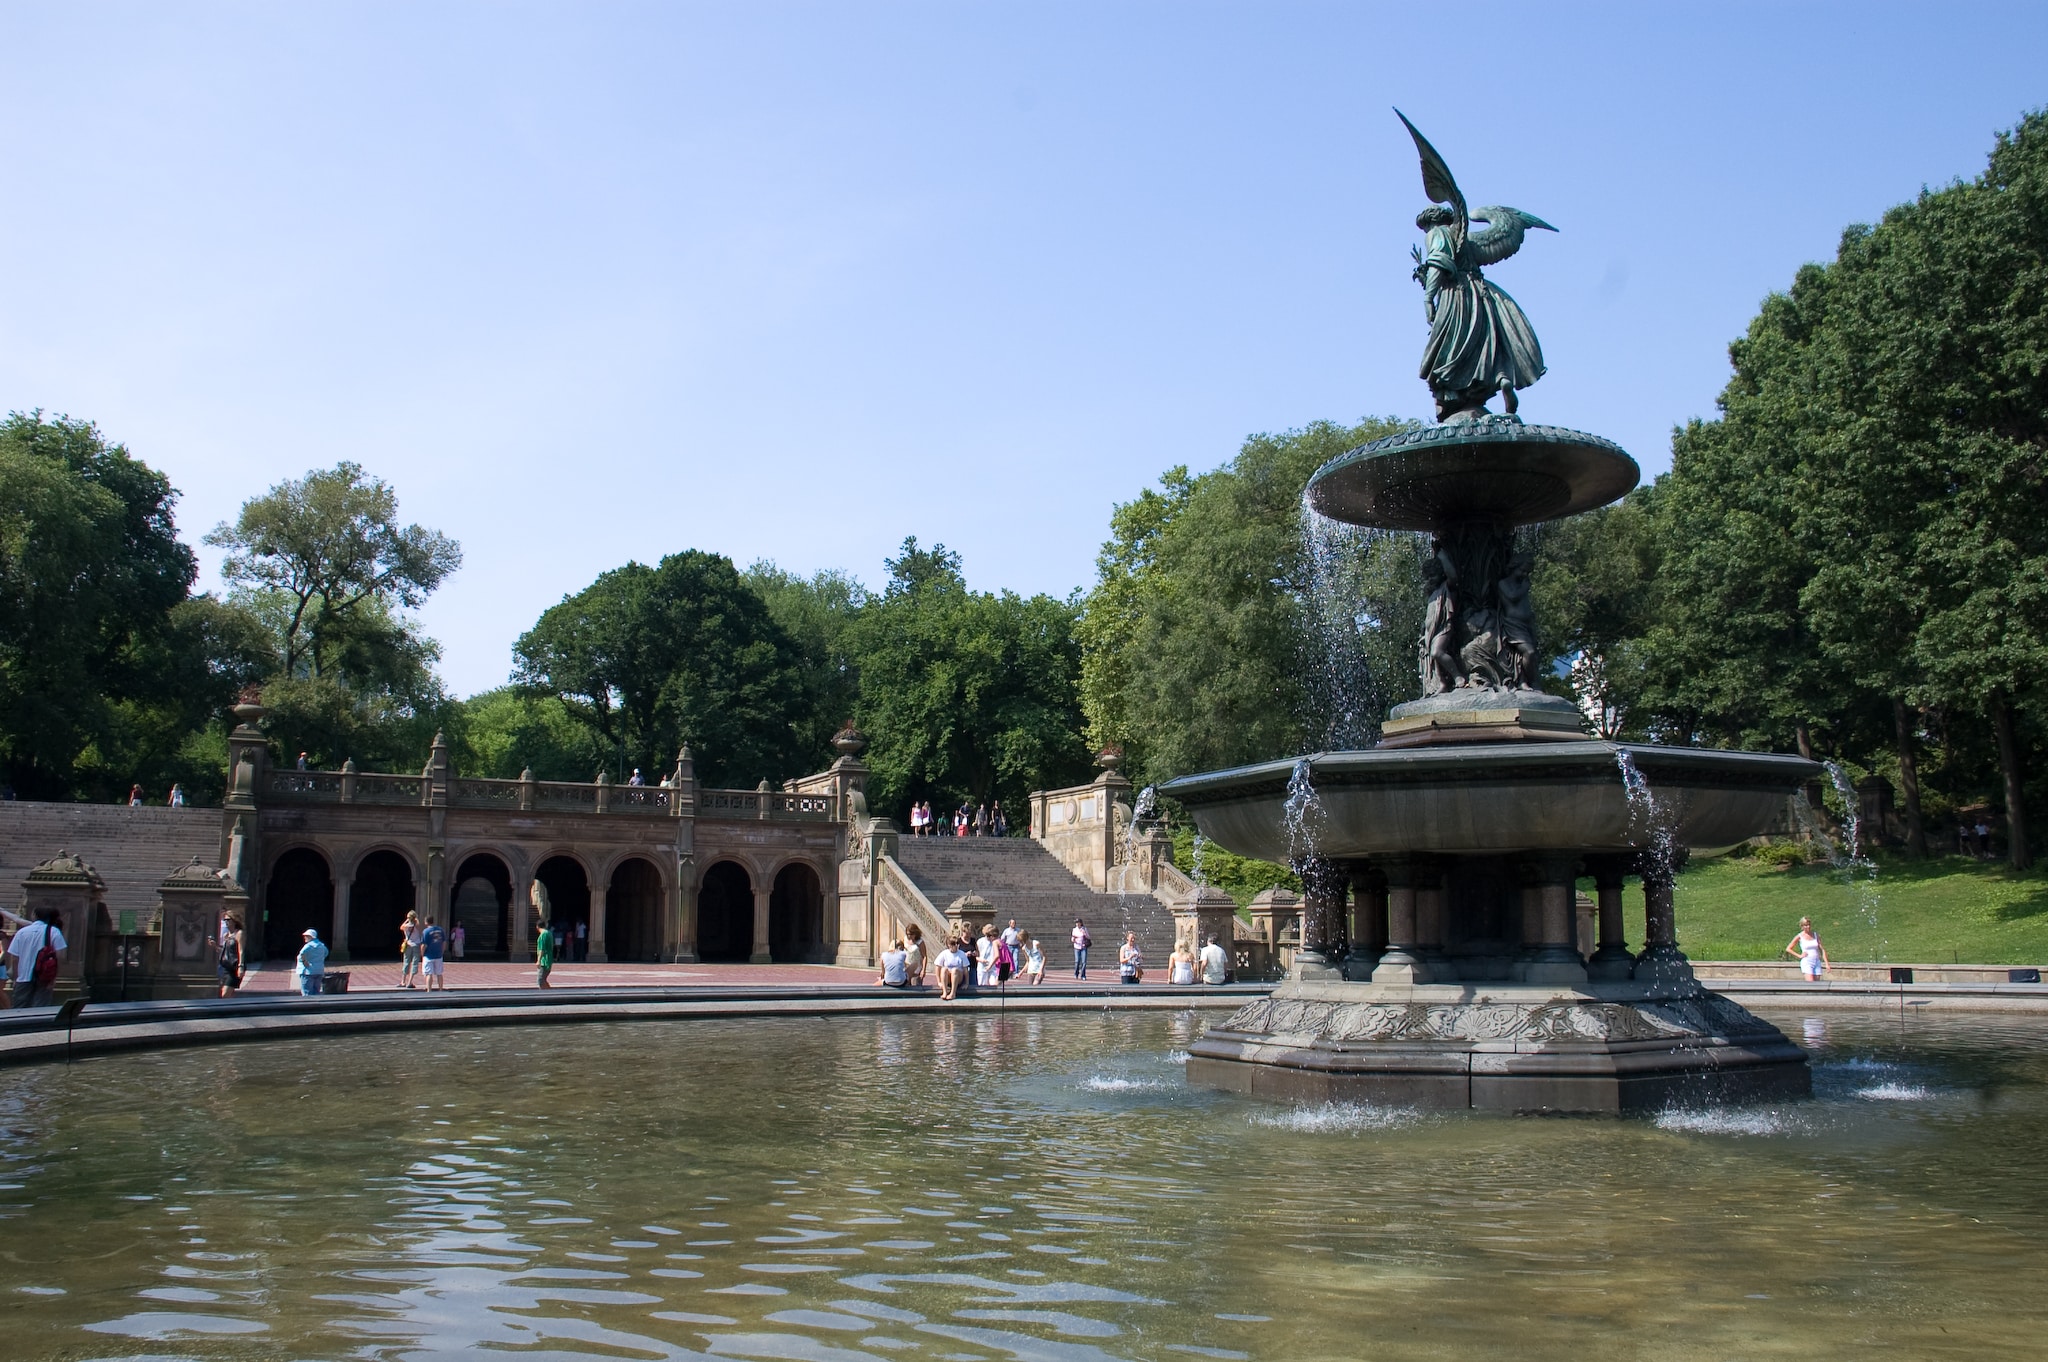 Bethesda Terrace in Central Park